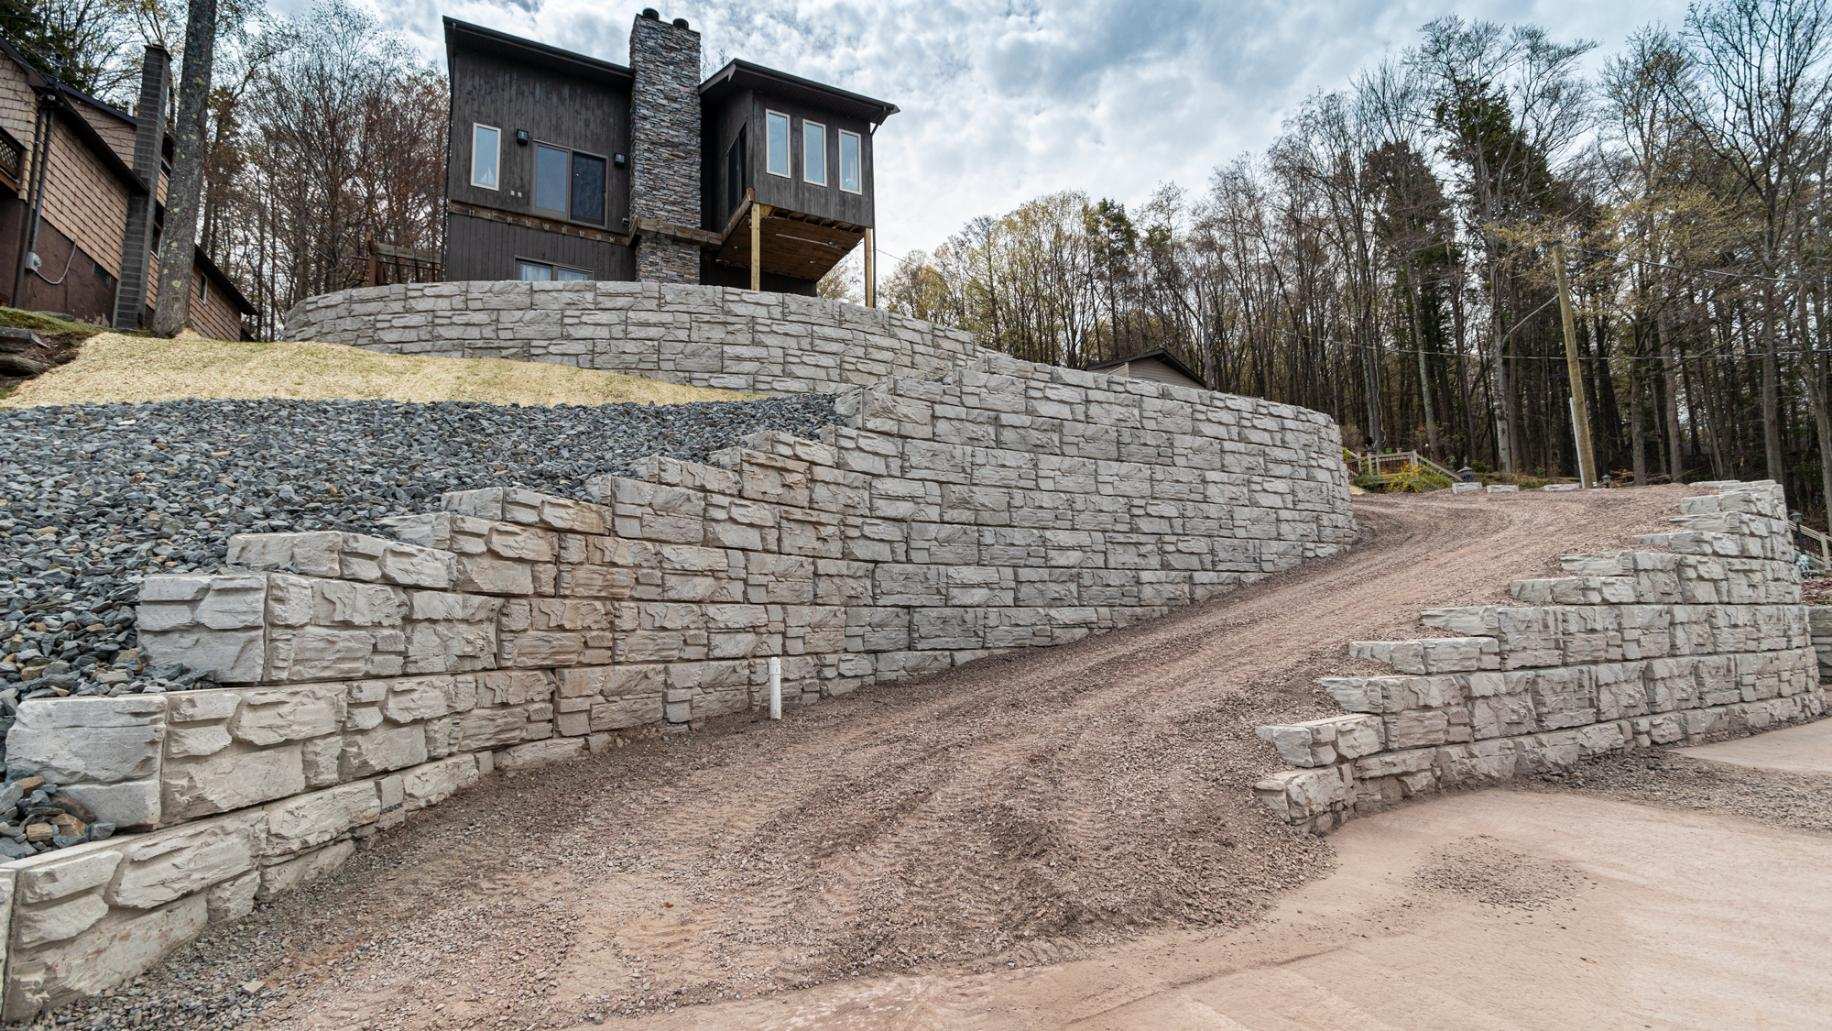 MagnumStone gravity and geogrid retaining walls at steep property